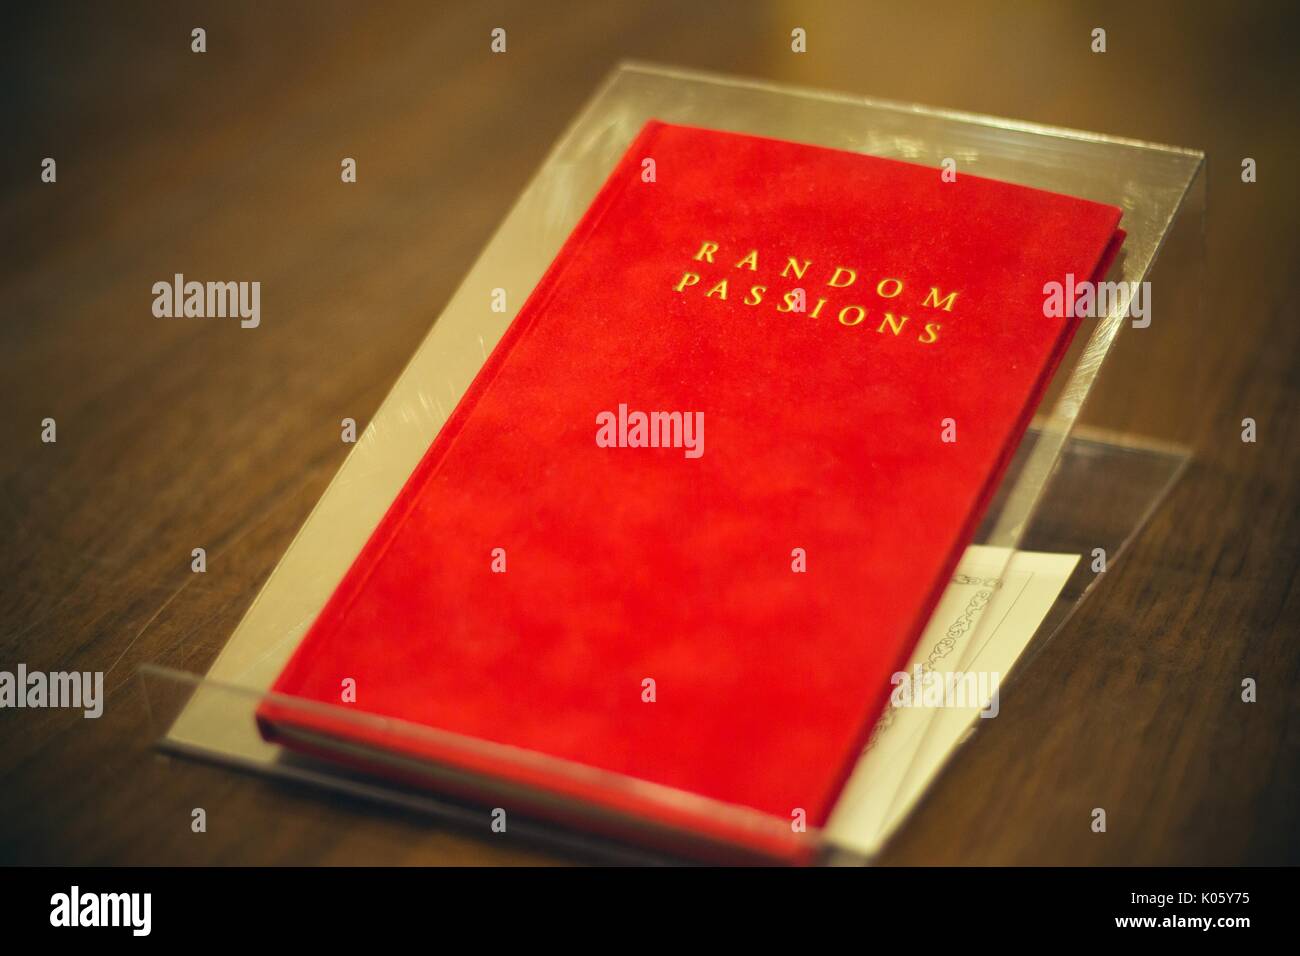 A book with a red-cover, the title 'Random Passions' written in gold, resting on a wooden table, 2016. Stock Photo